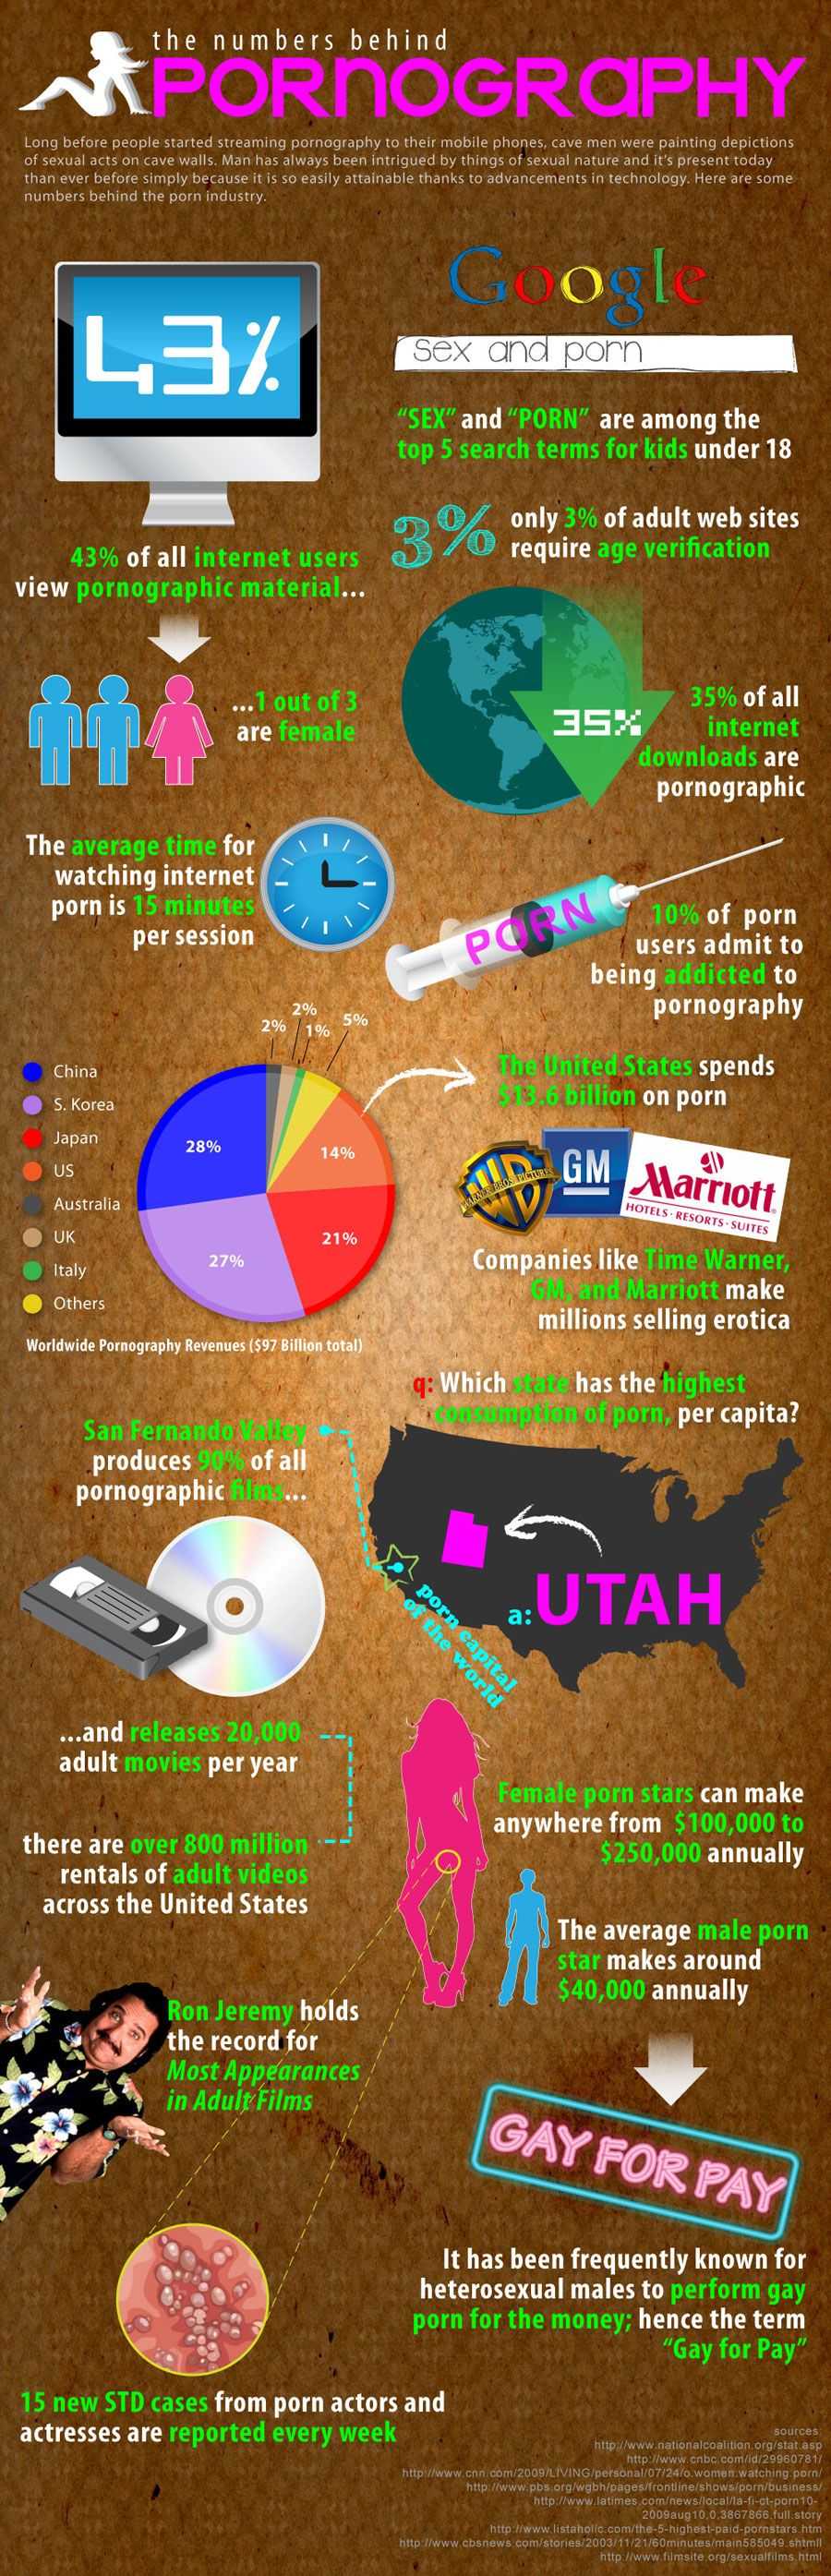 The Numbers Behind Pornography